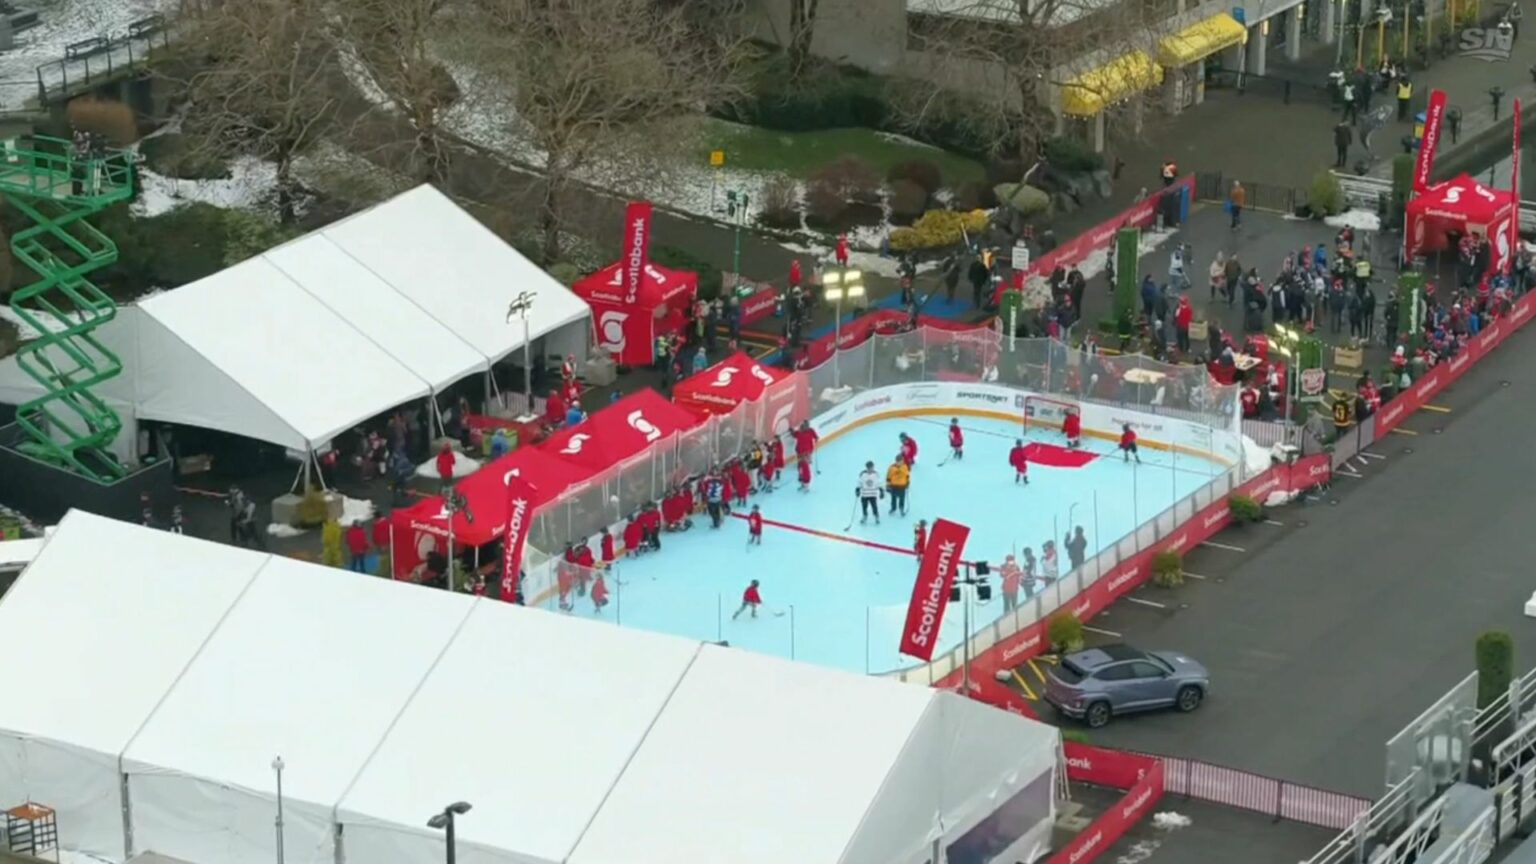 Scotiabank Hockey Day Real Life Event Image